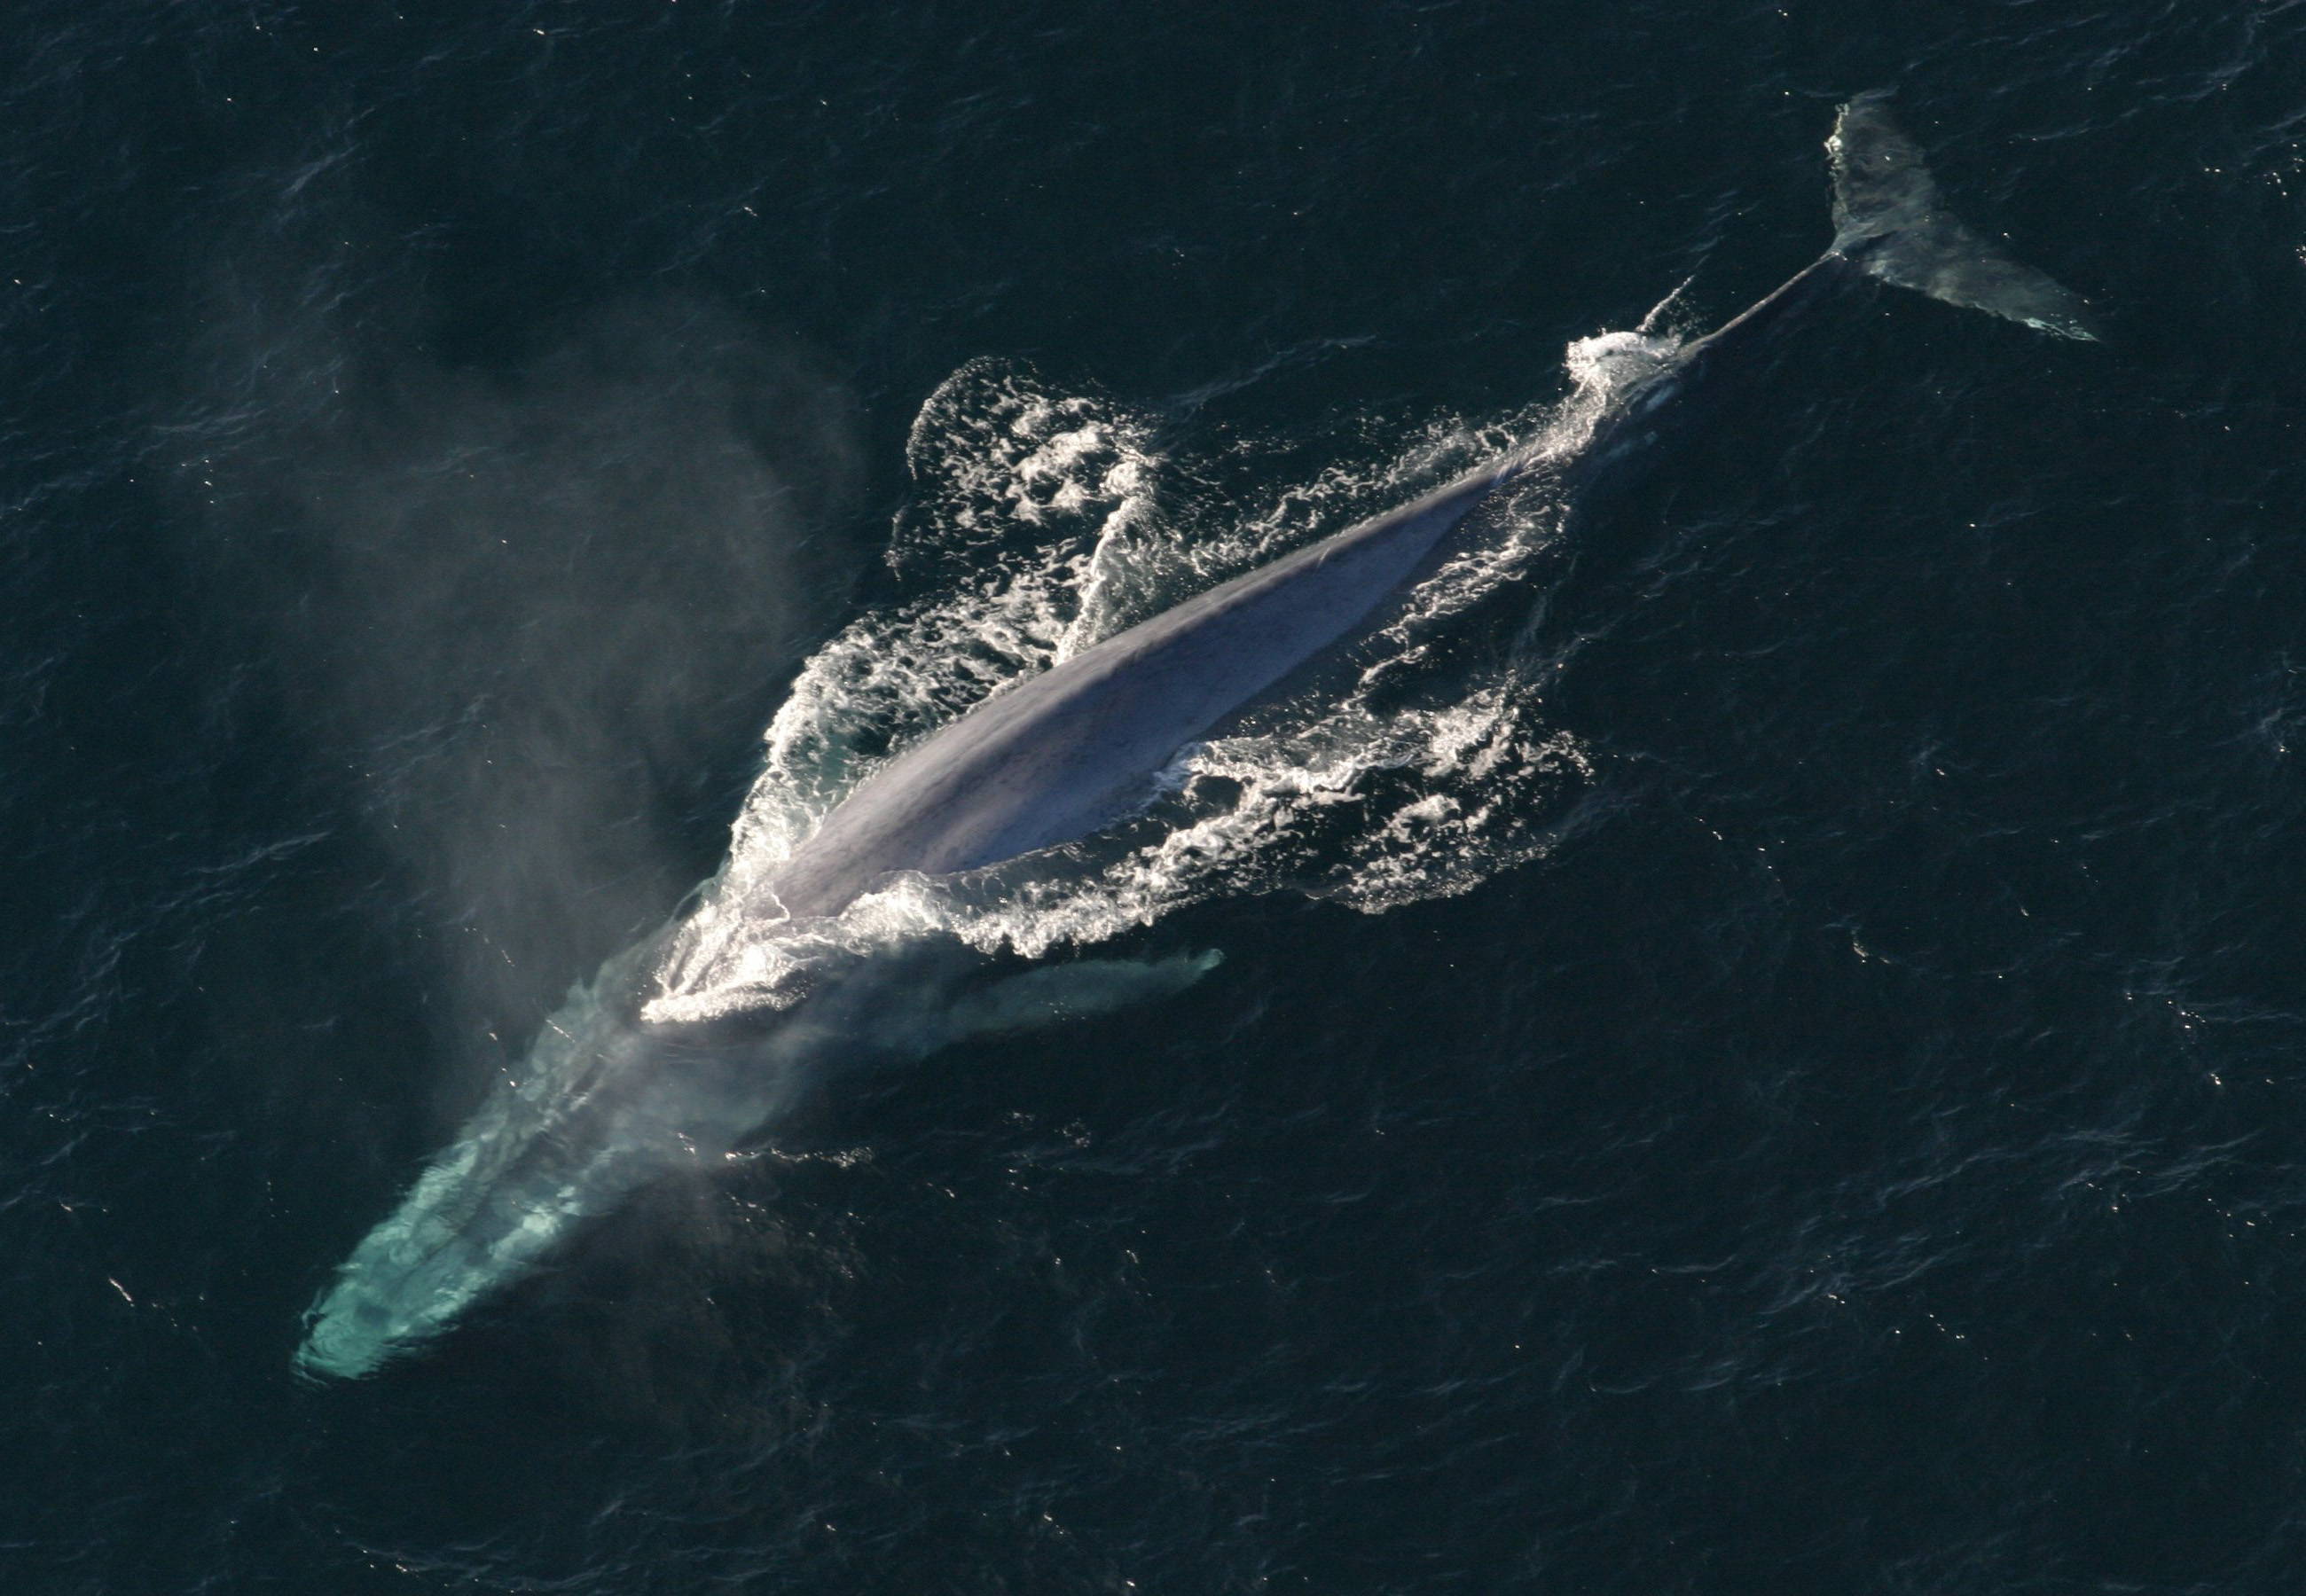 Blue whales can grow to be an astonishing